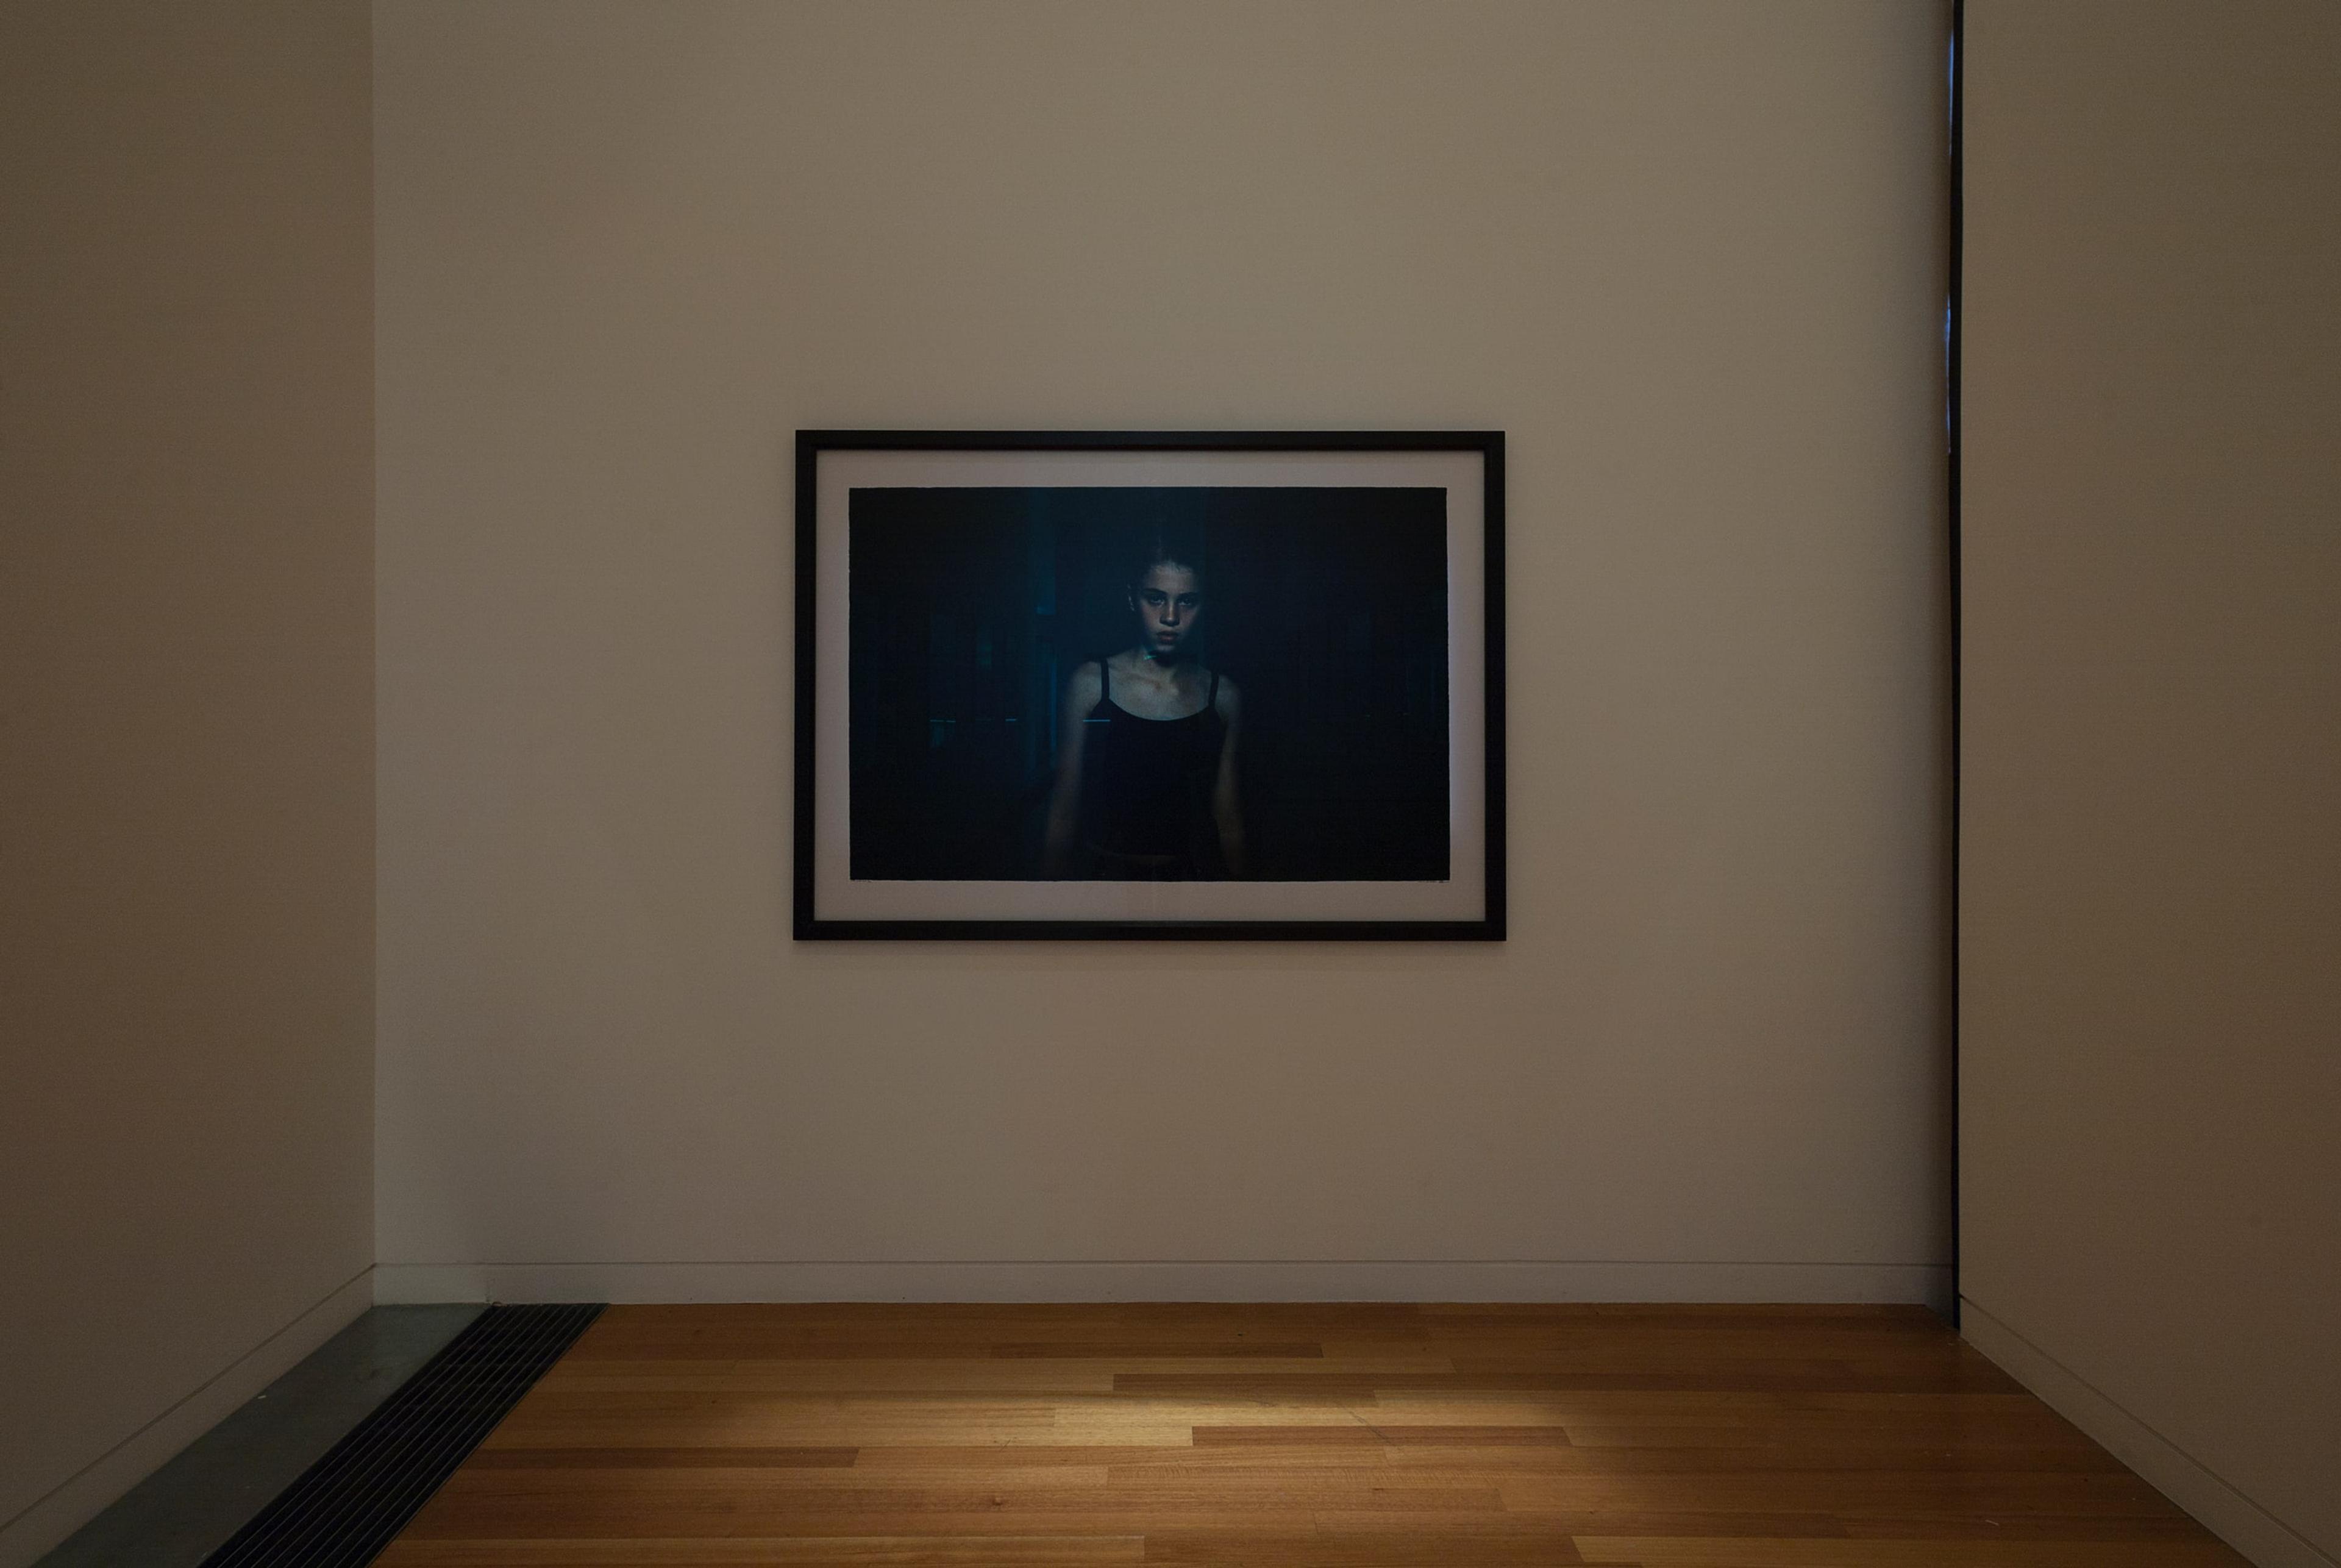 Installation view of Bill Henson, from the series Untitled 1998/1999/2000, in Beautiful Creatures: Jack Smith / Bill Henson / Jacqueline Fraser. Photo: Shaun Waugh.